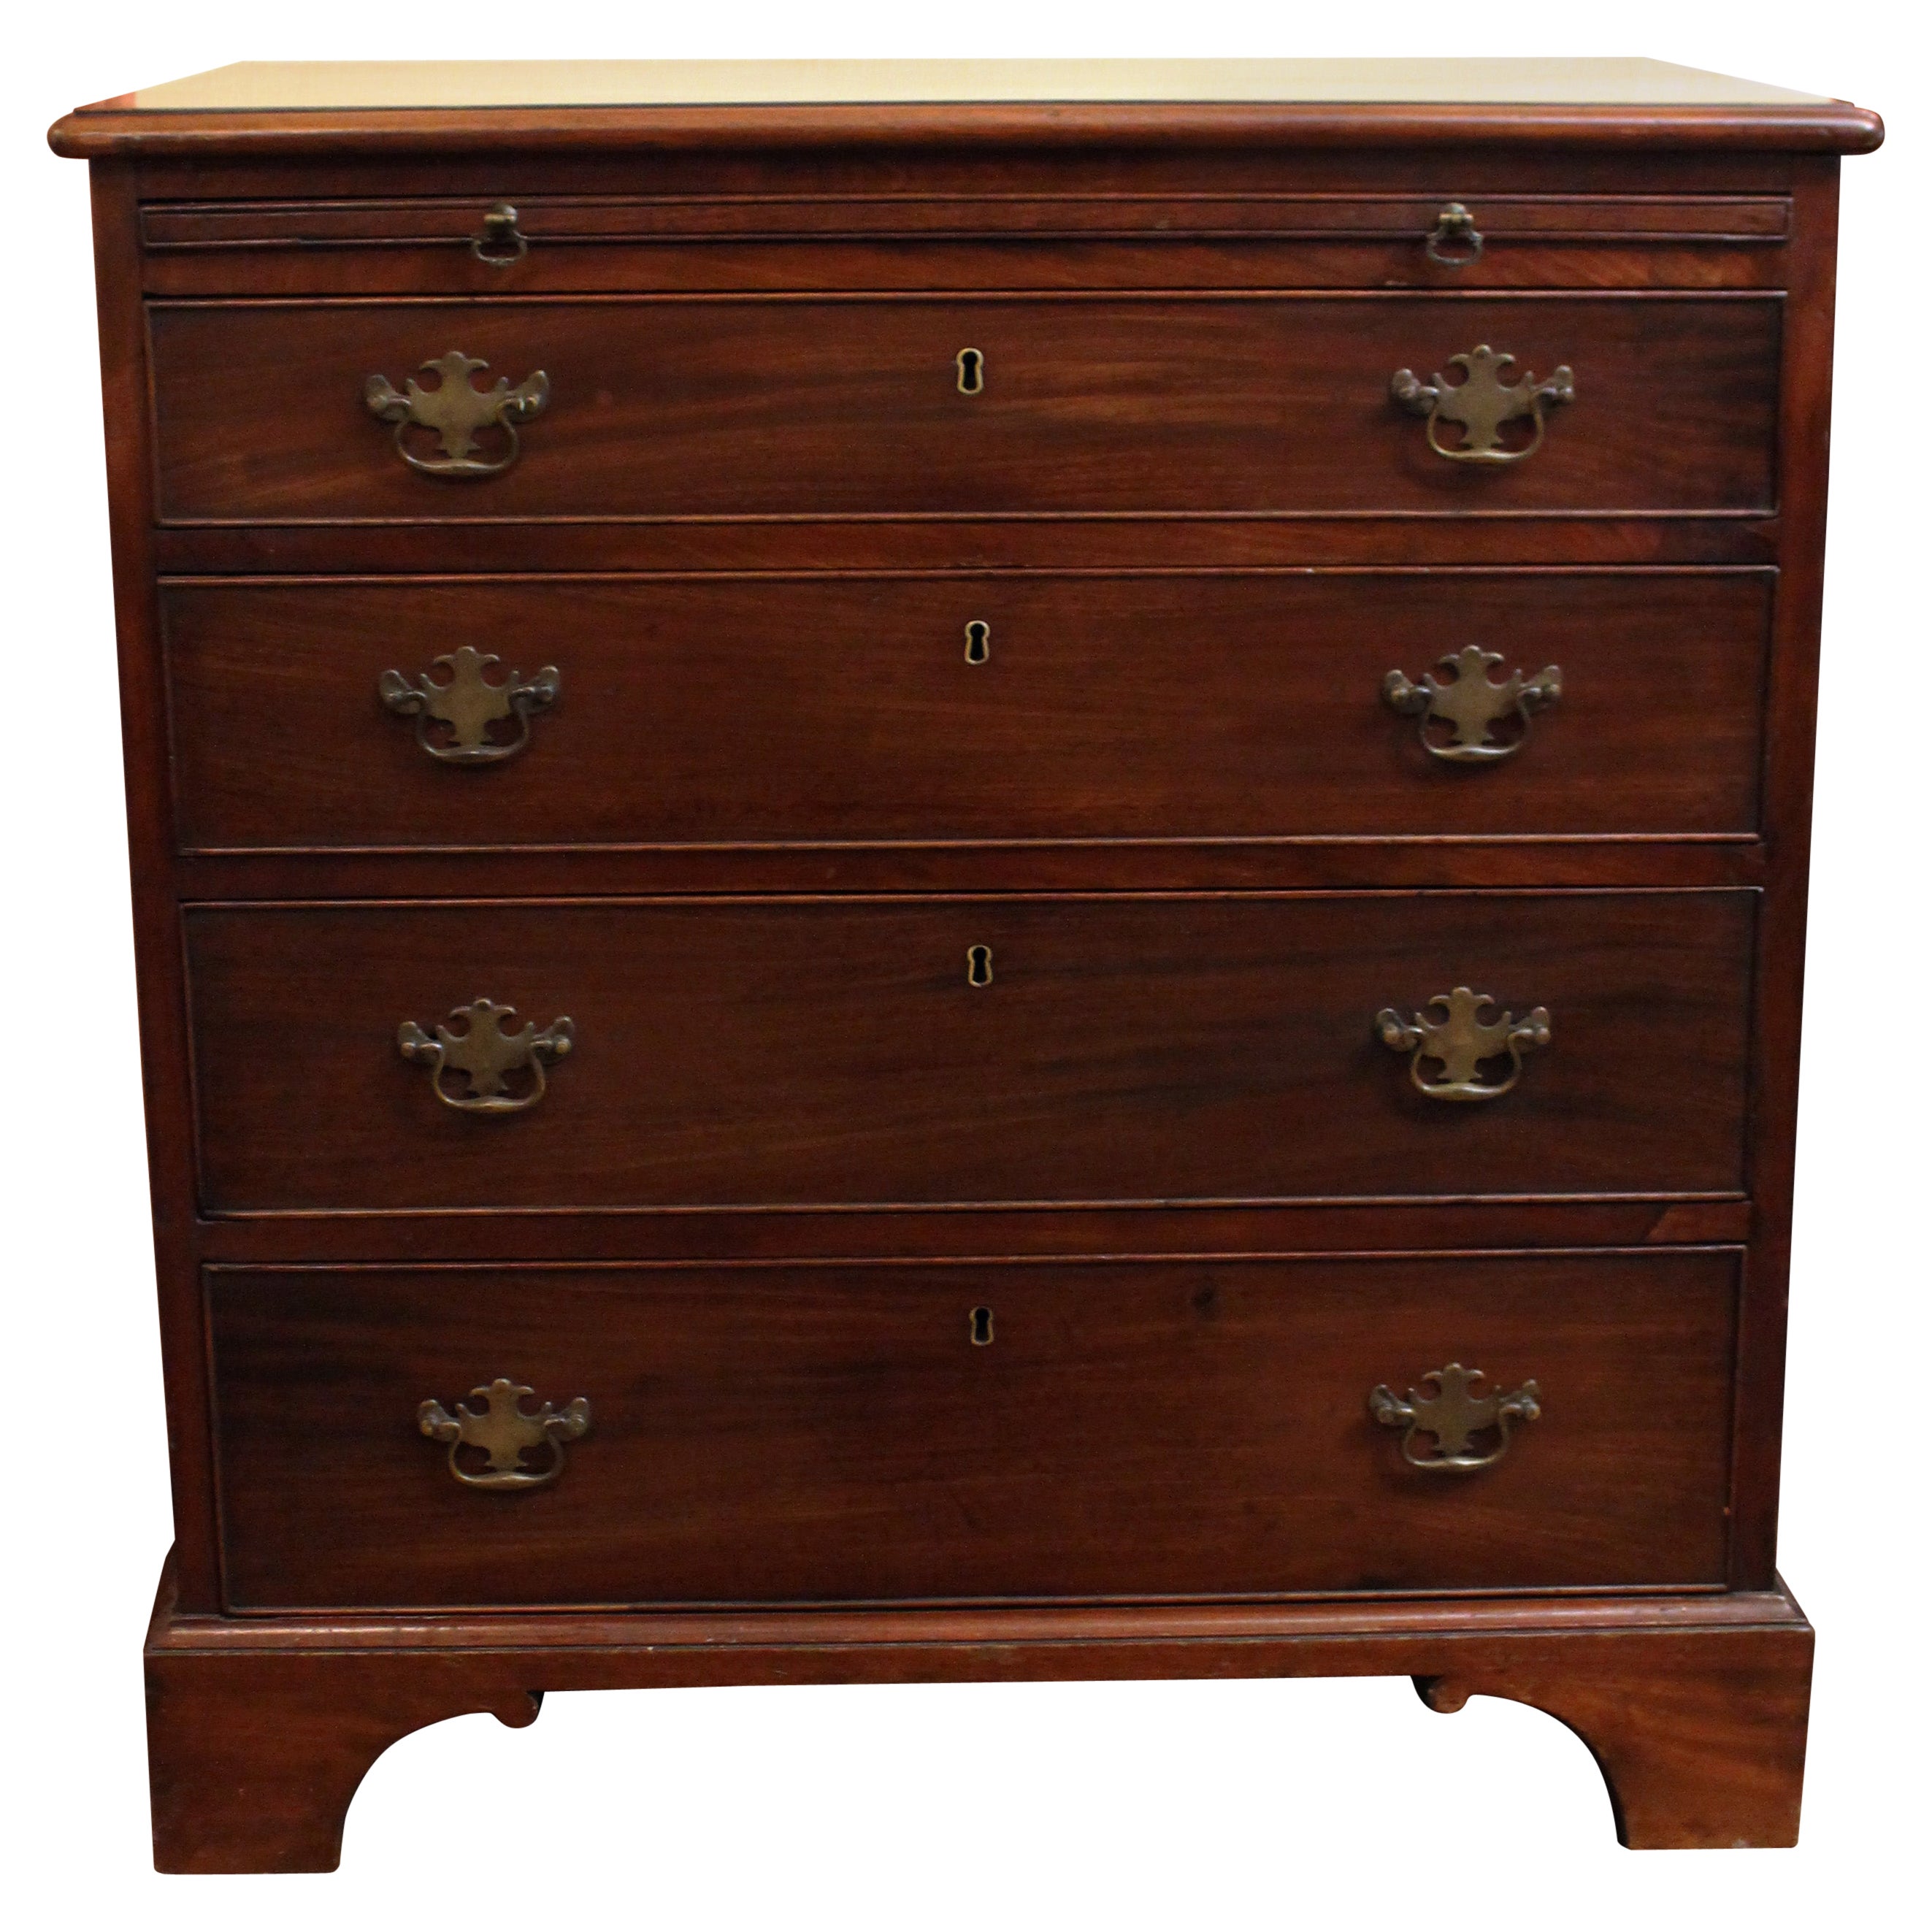 Circa 1780 Four Drawer Bachelor's Chest of Drawers